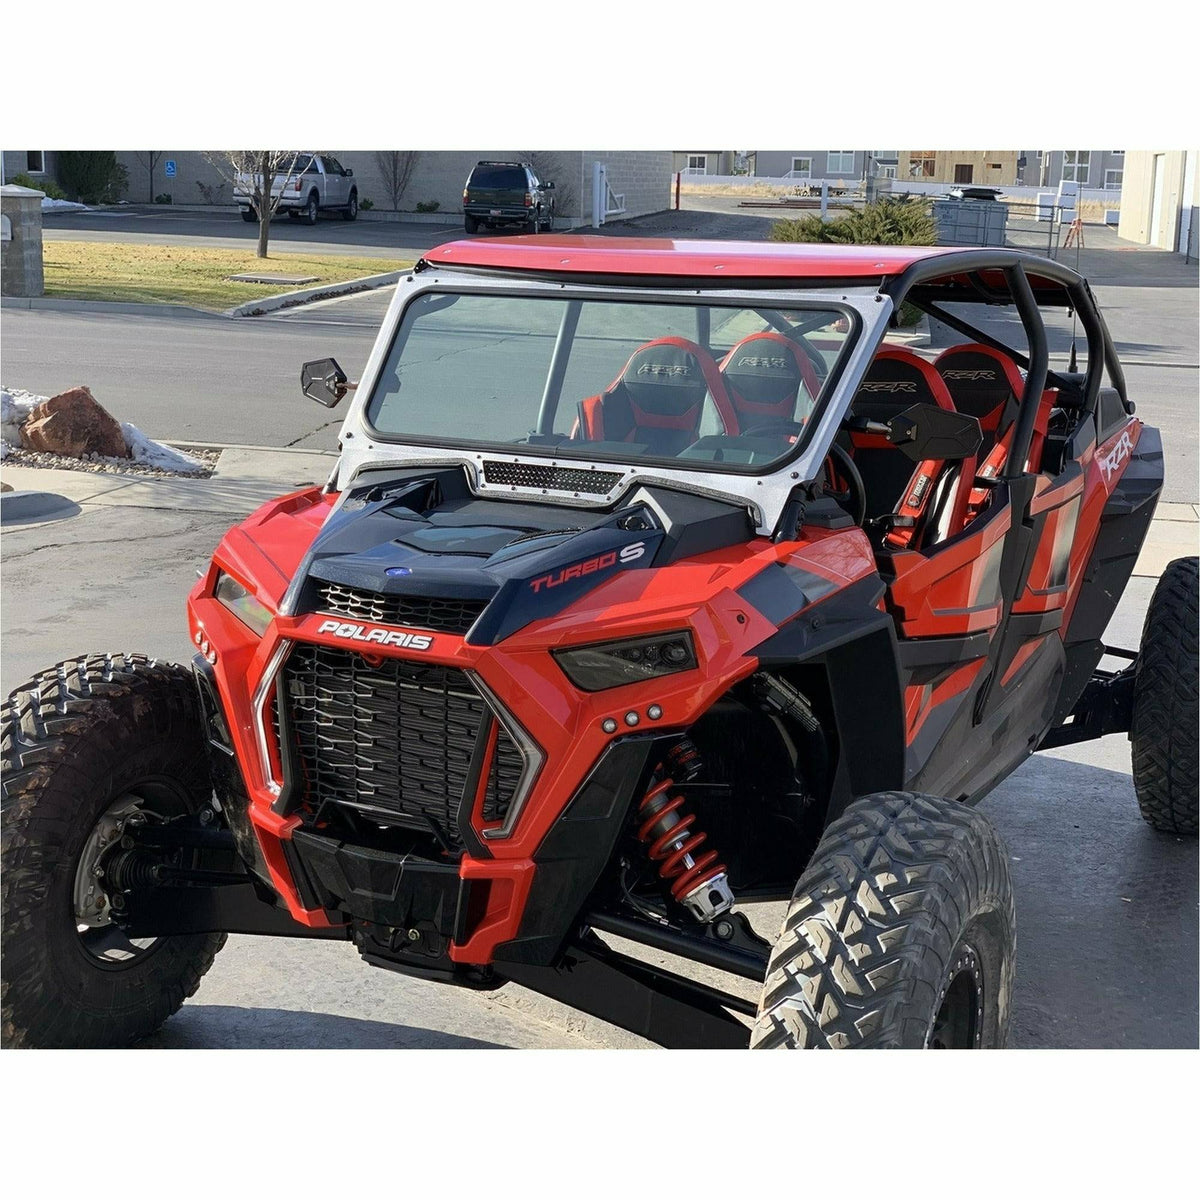 Moto Armor Polaris RZR Glass Windshield for Vent Racing Roll Cage